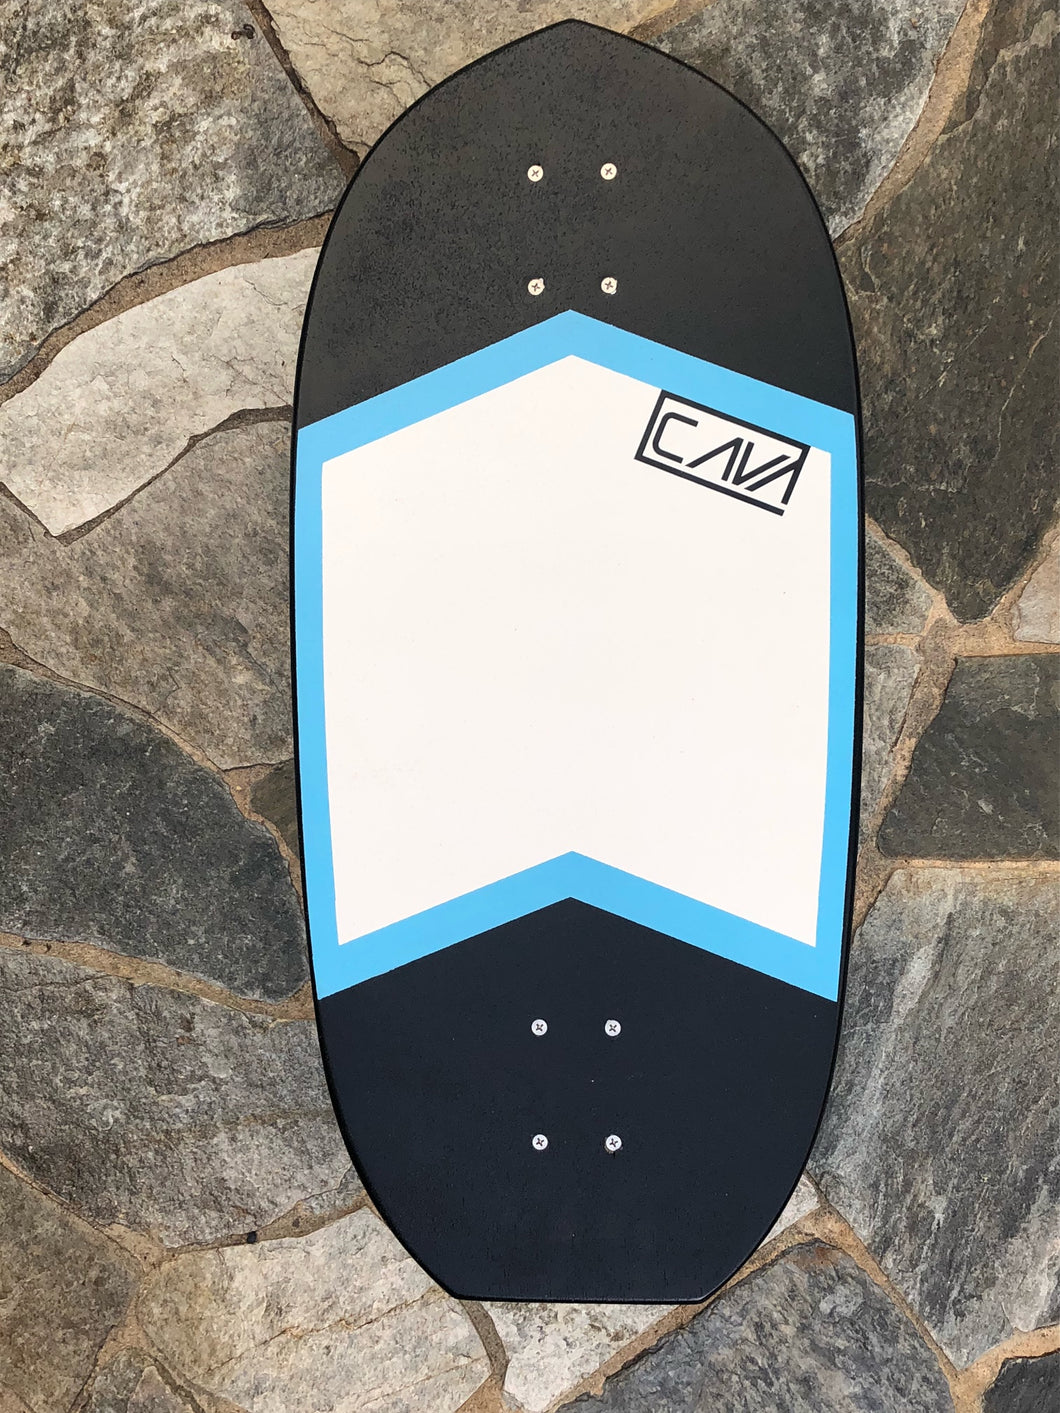 Little Chubby Surfskate with Waterborne Surf Adapter